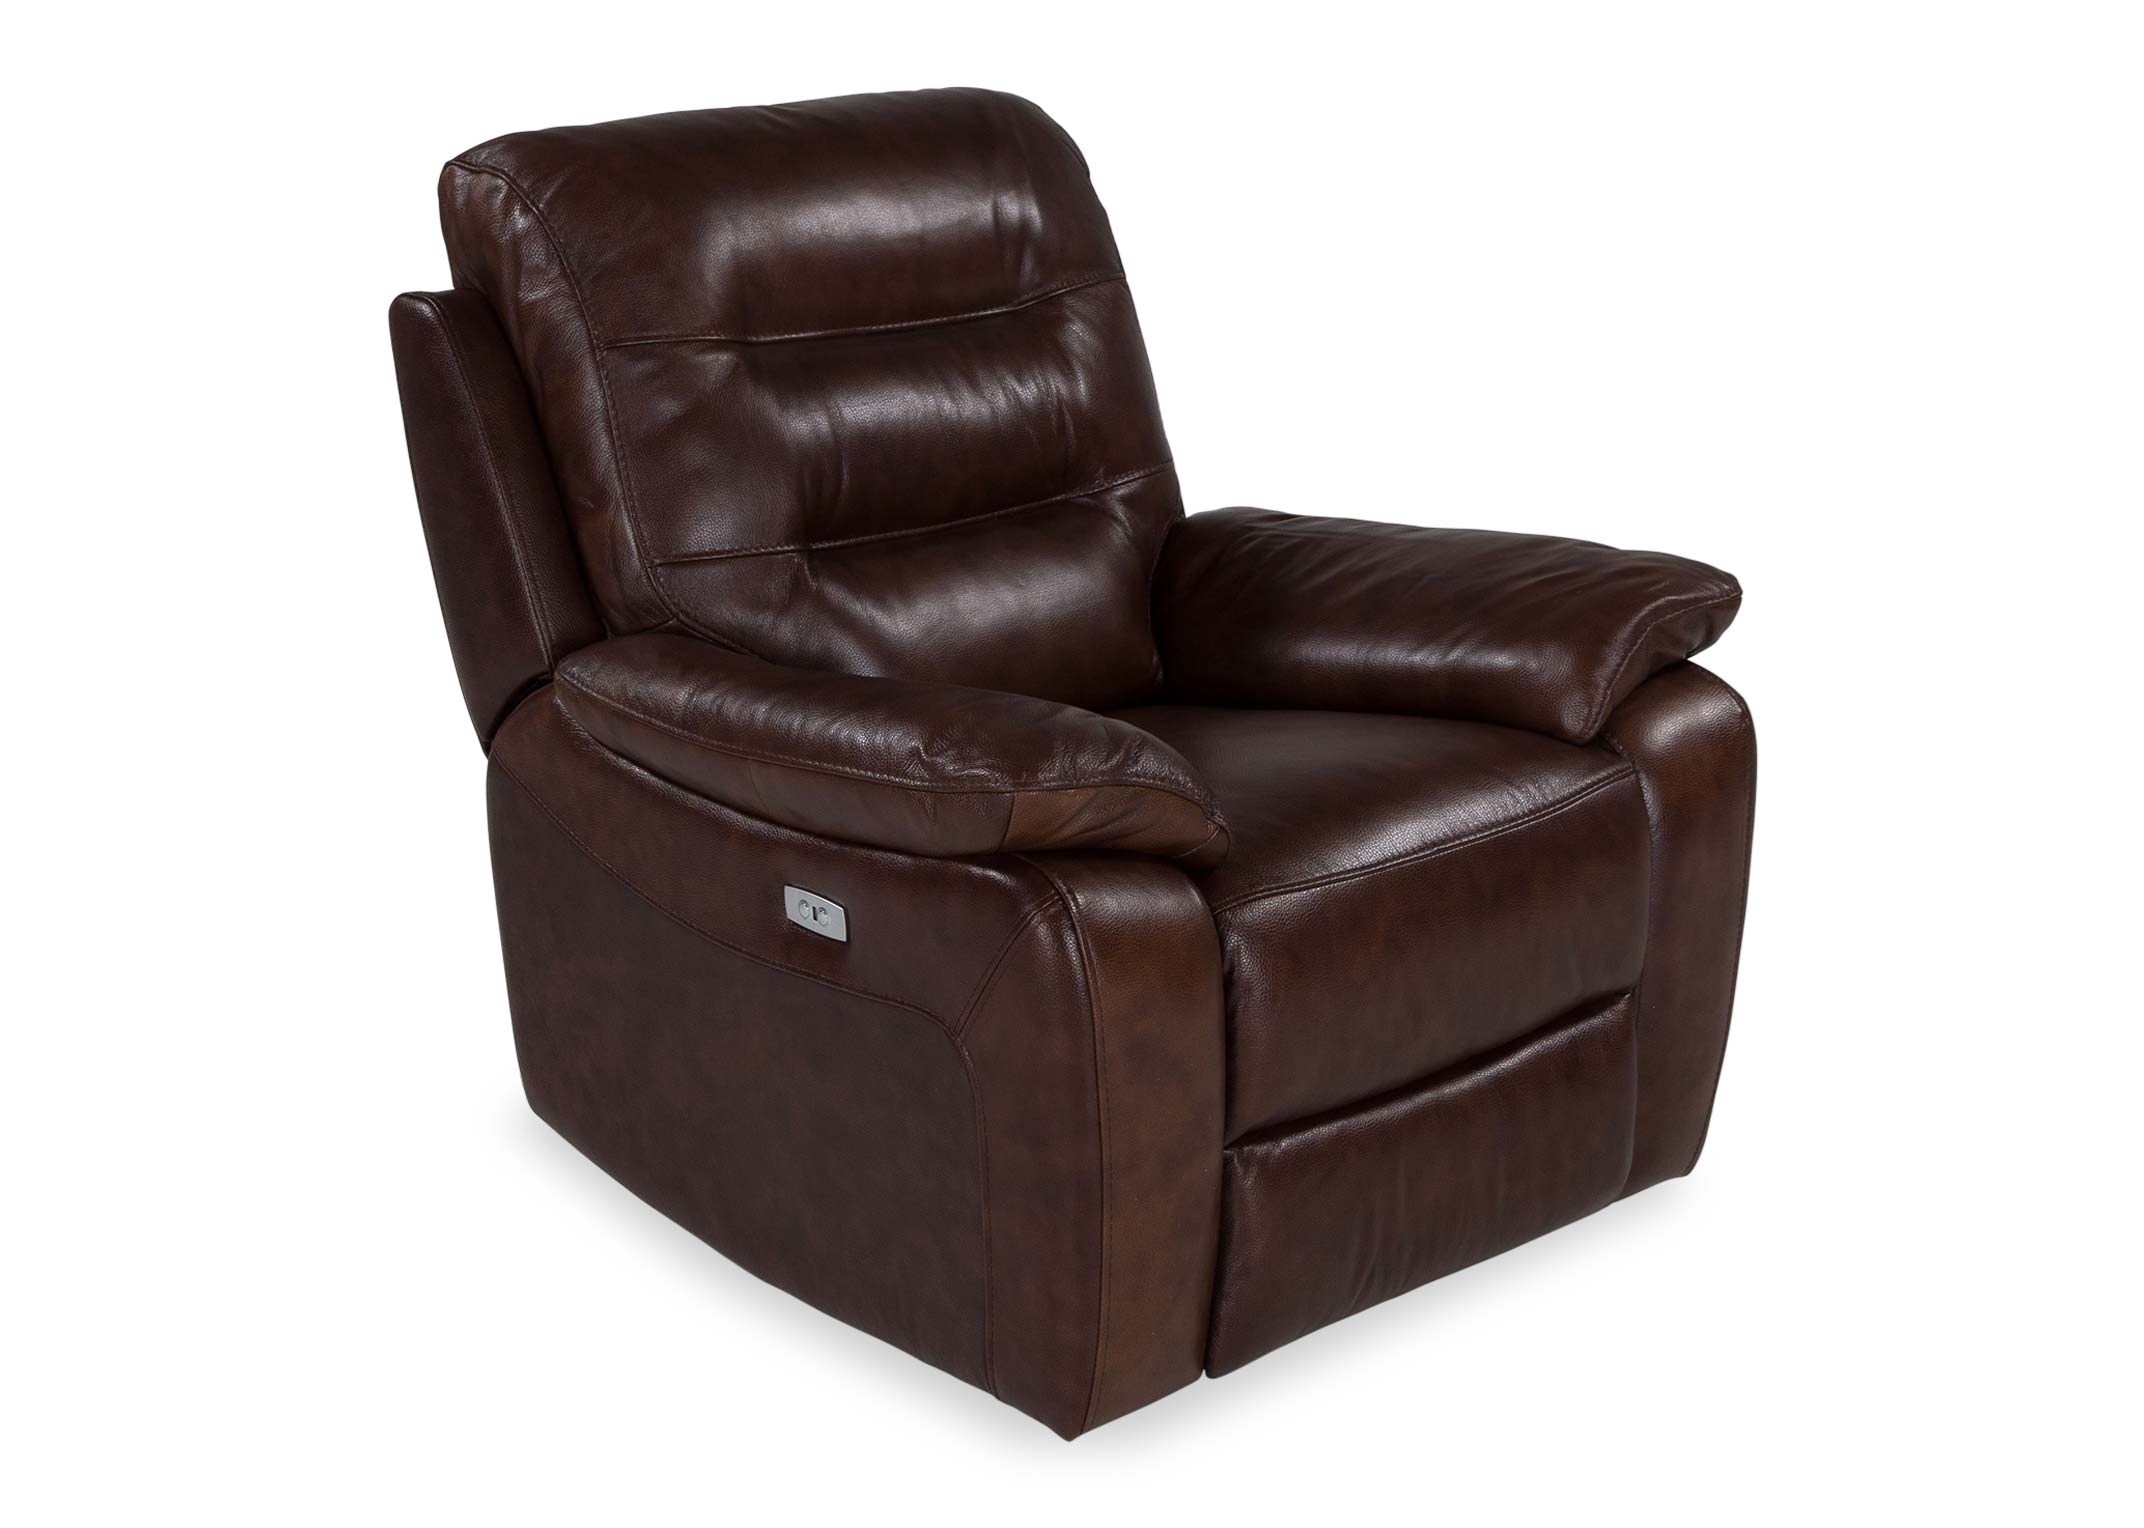 Brown Leather Power Reclining Armchair, Distressed Leather Recliners